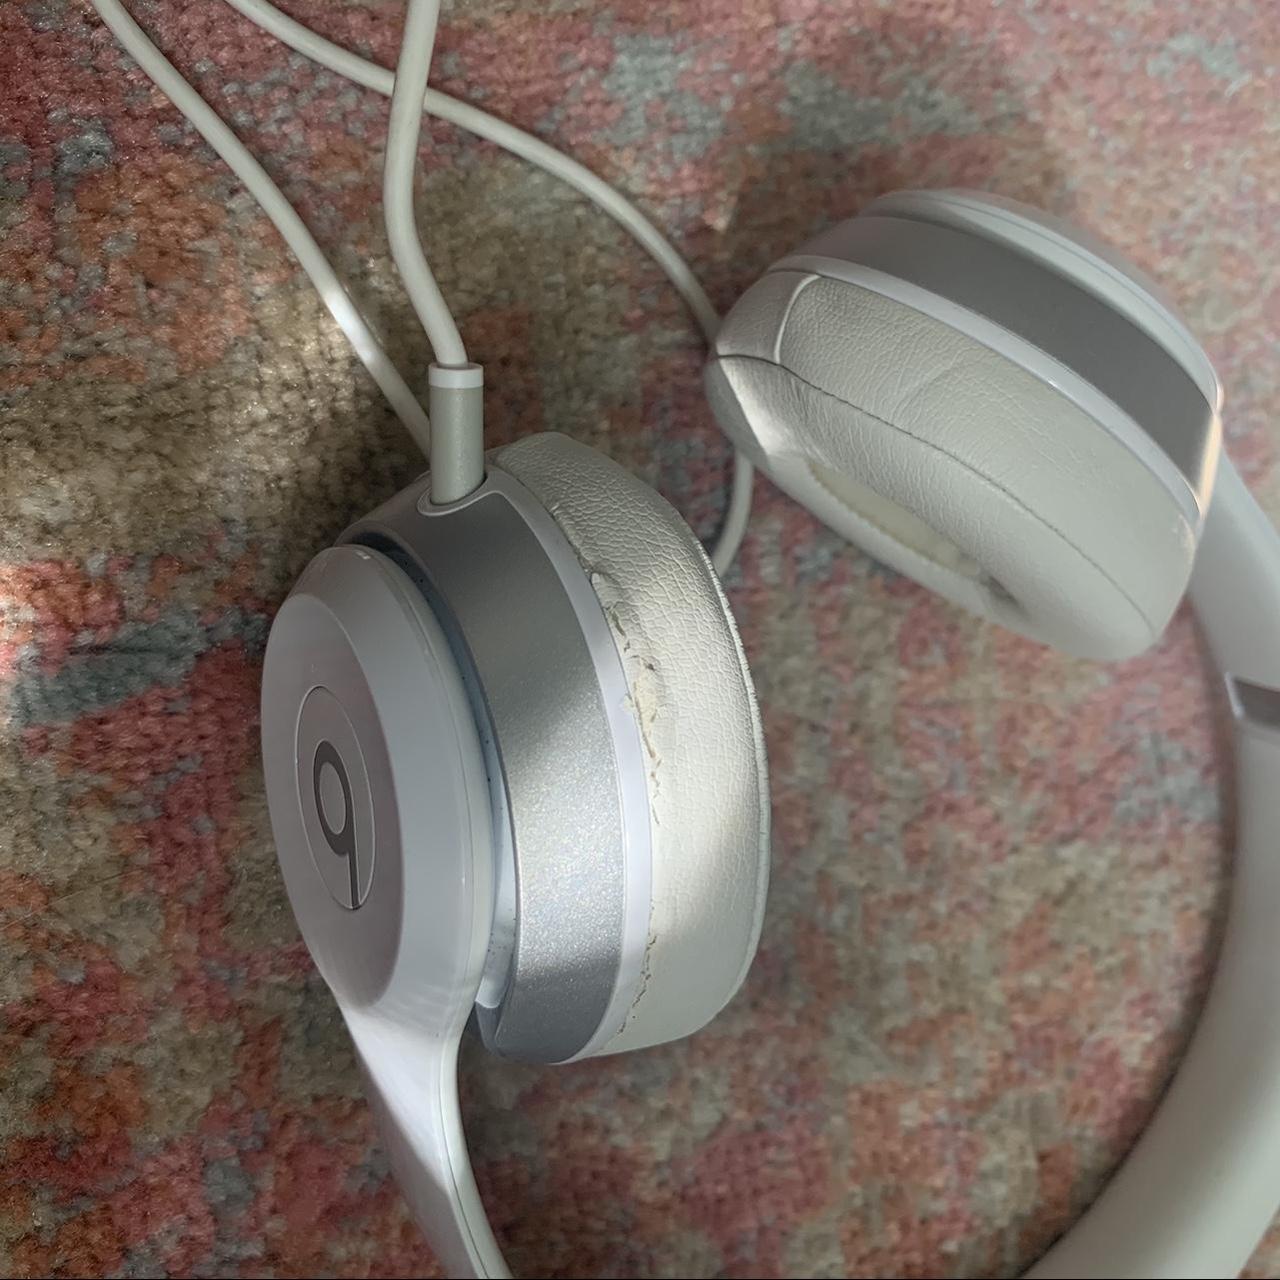 Product Image 3 - Wired headphones - no Bluetooth!!